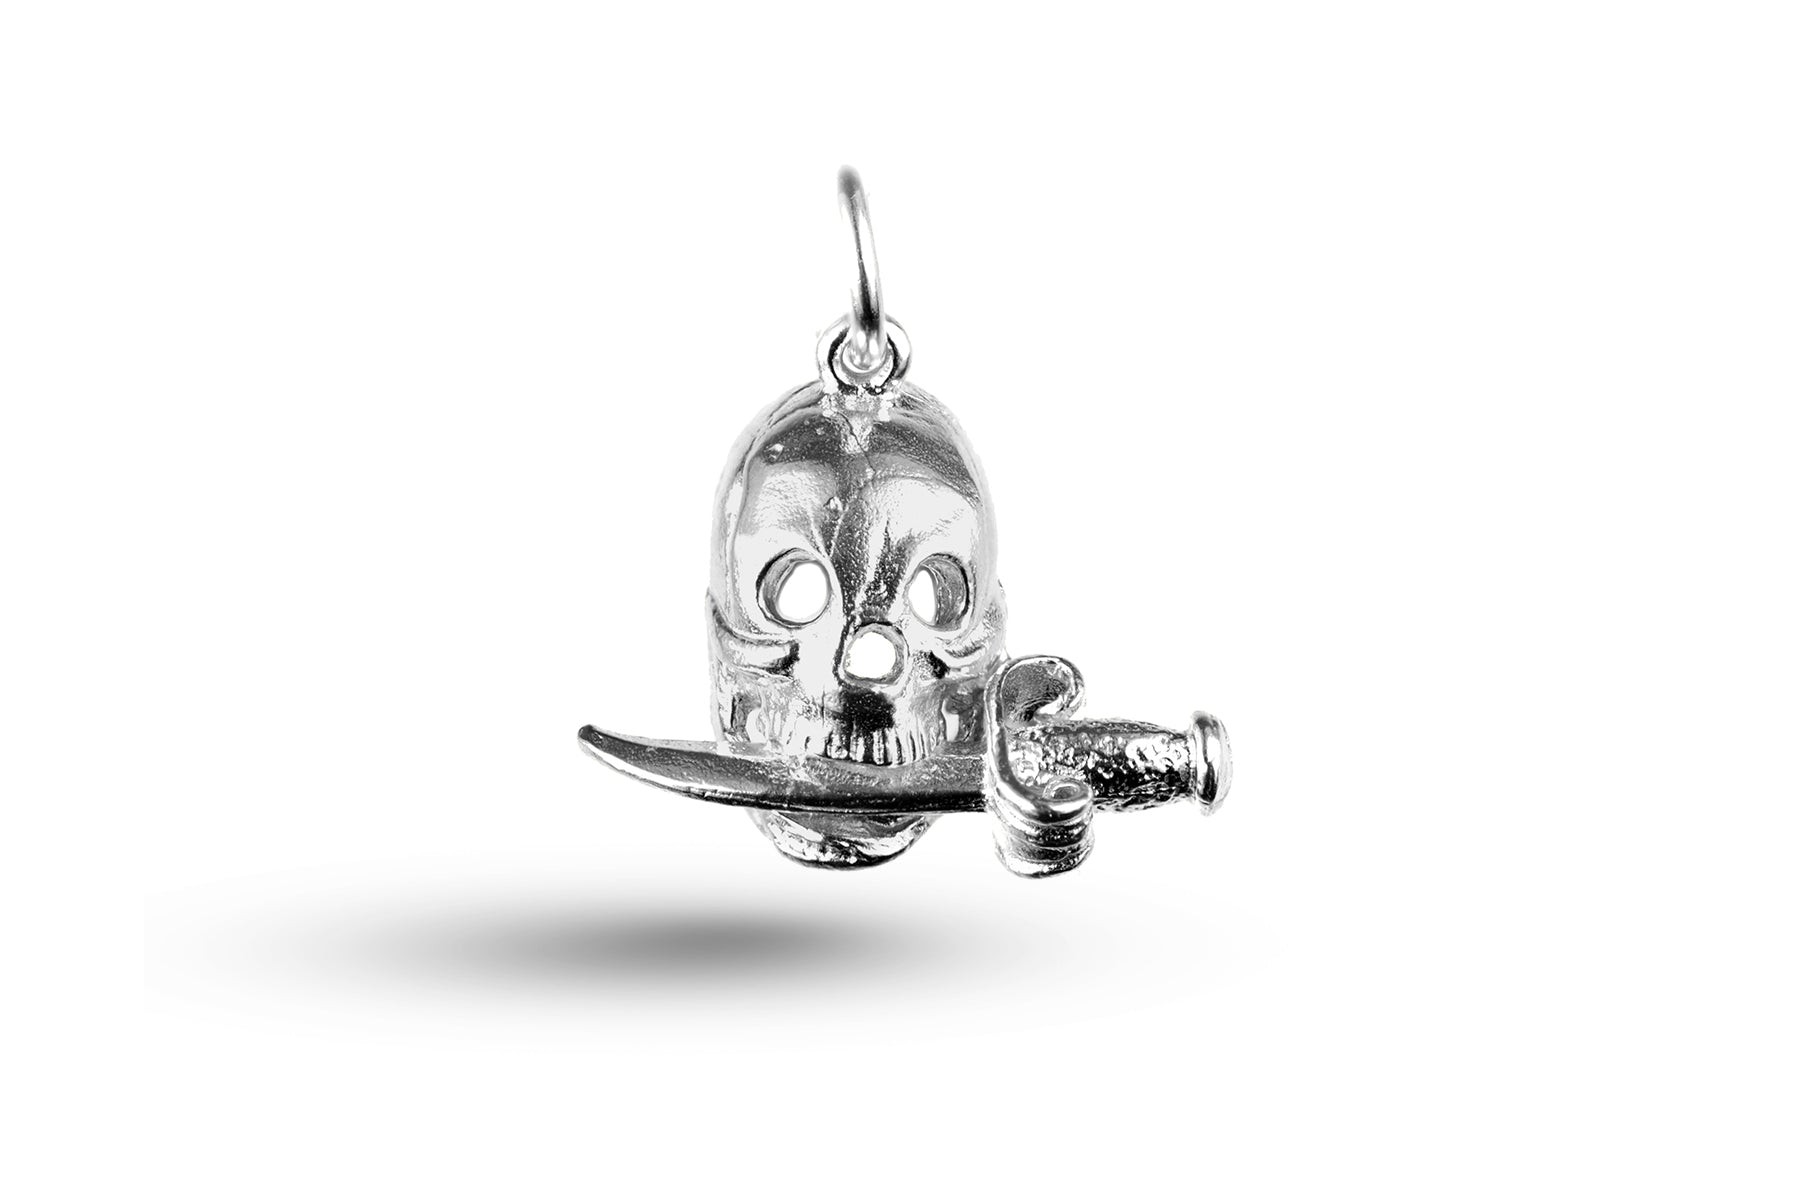 White gold Skull with Dagger in Mouth charm.